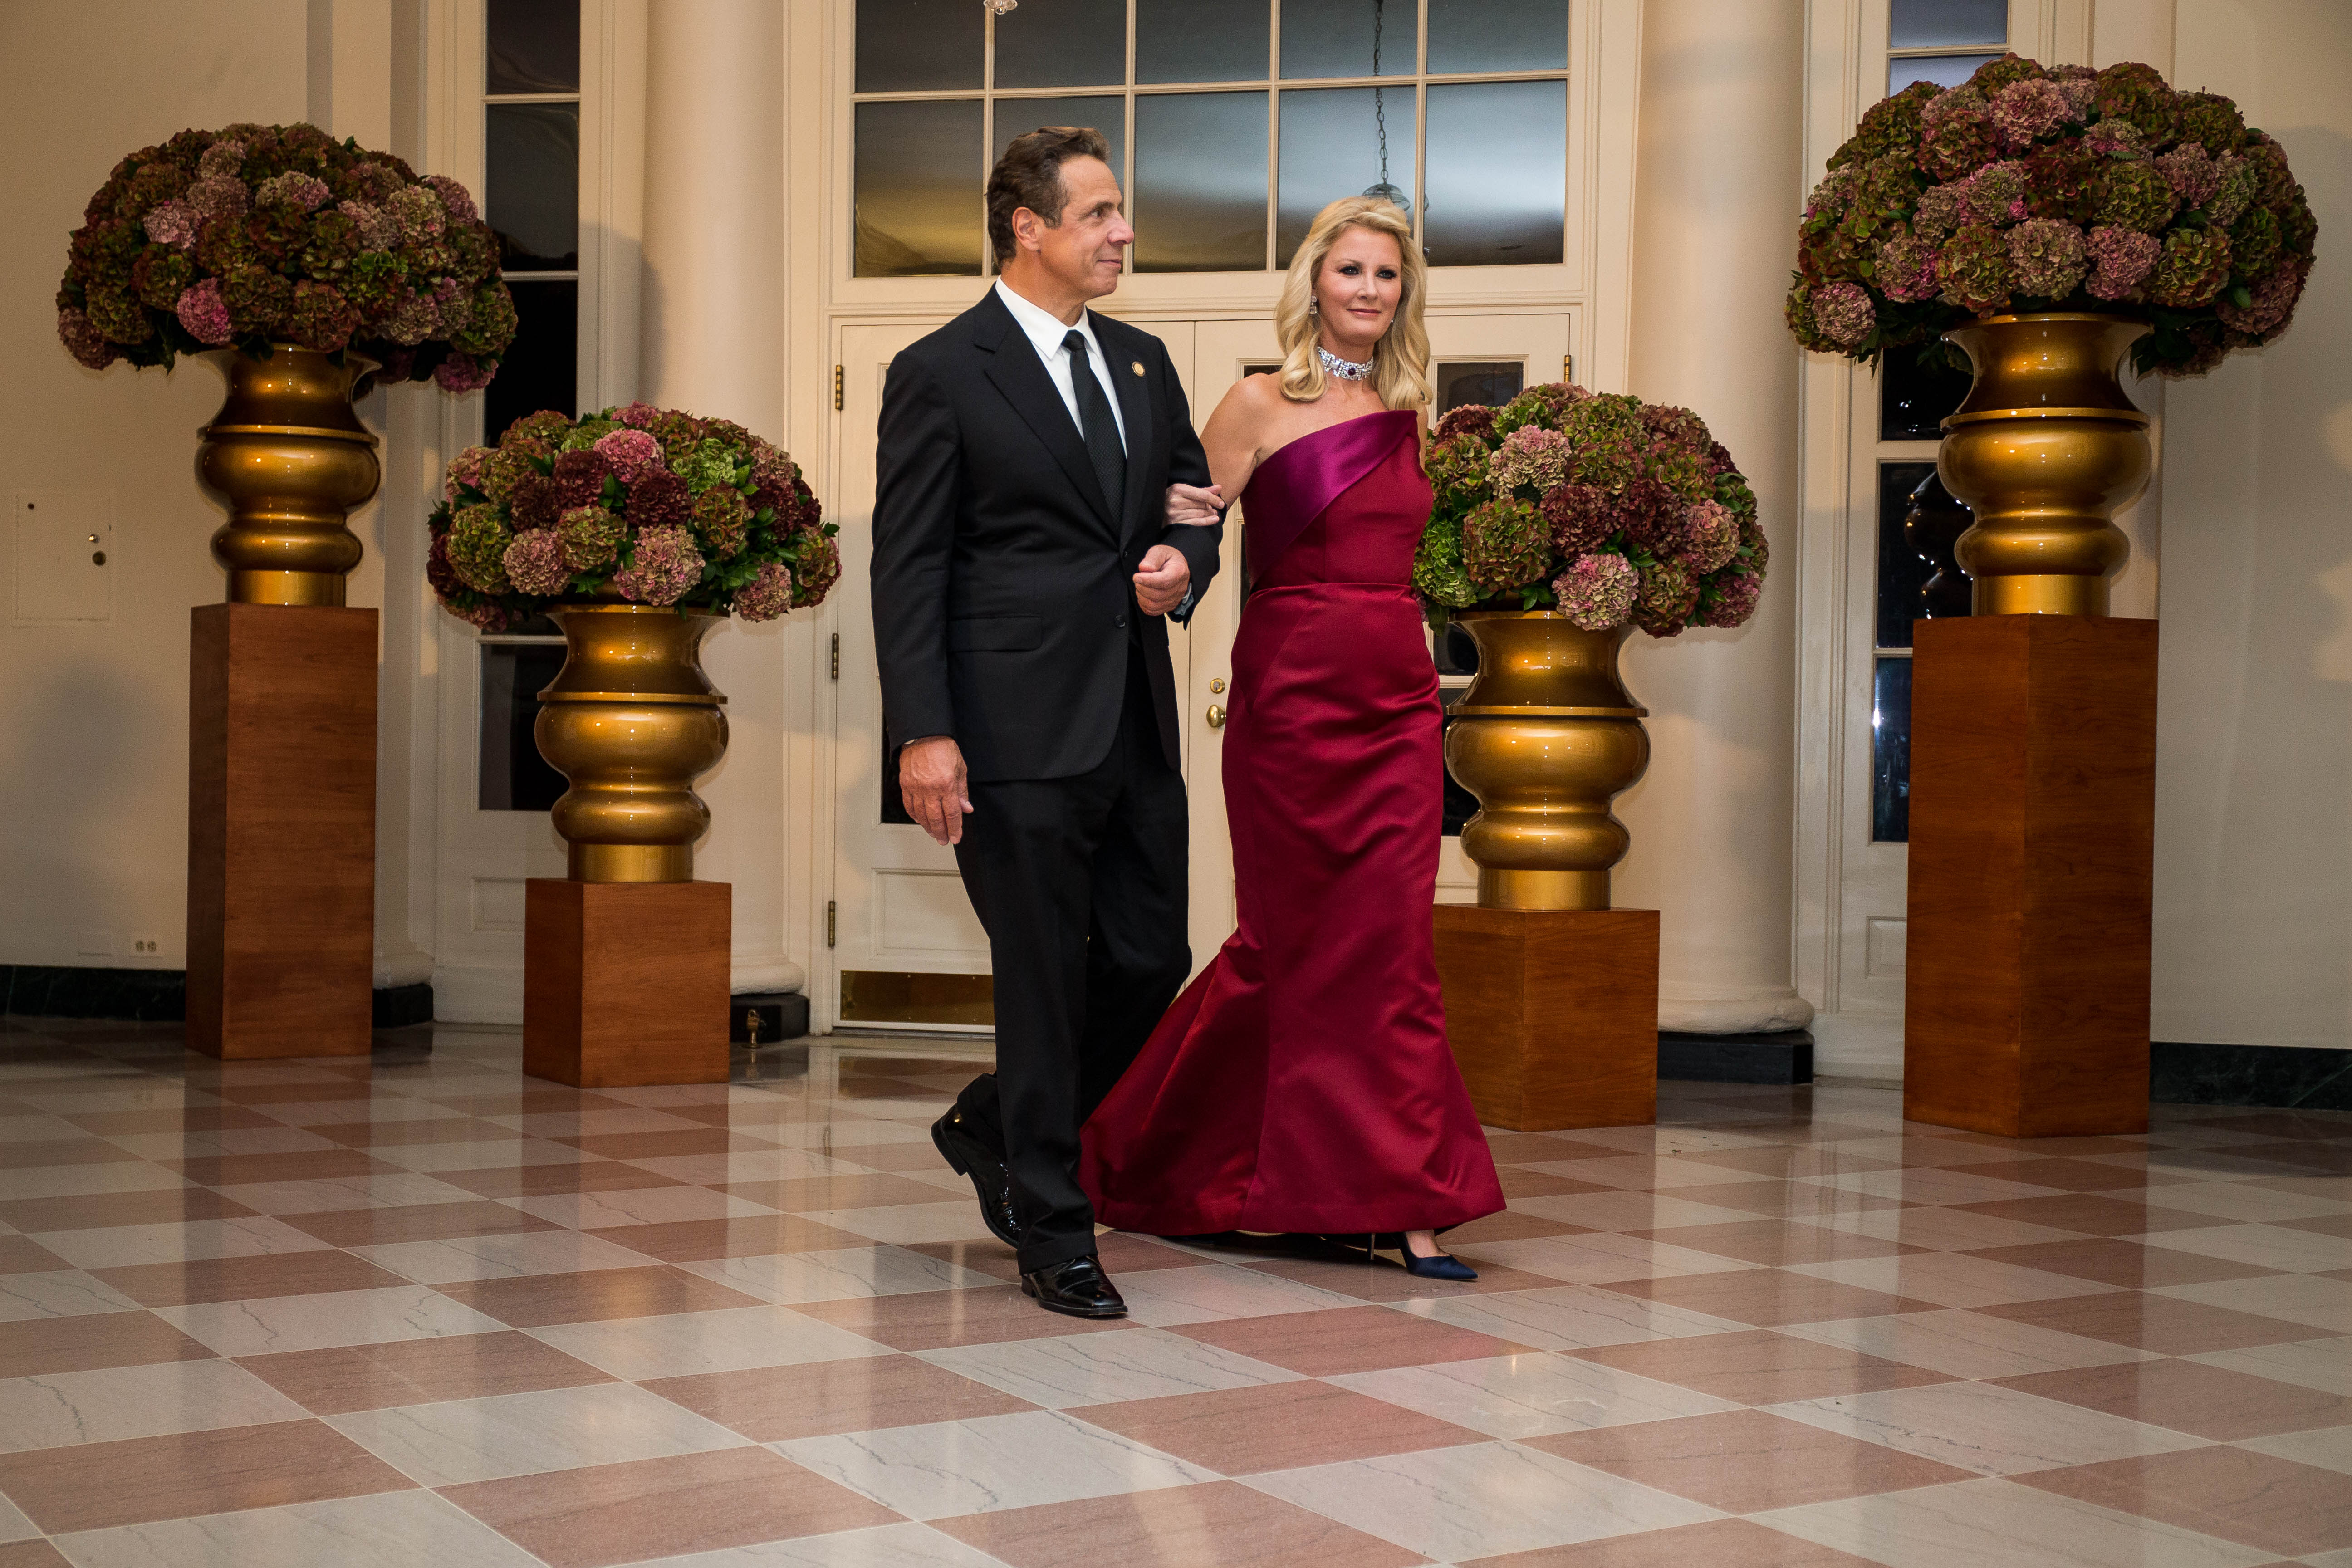 Andrew Cuomo and  Sandra Lee arrive for a State Dinner in honor of Italian Prime Minister Matteo Renzi and his wife Agnese Landini at the White House October 18, 2016 